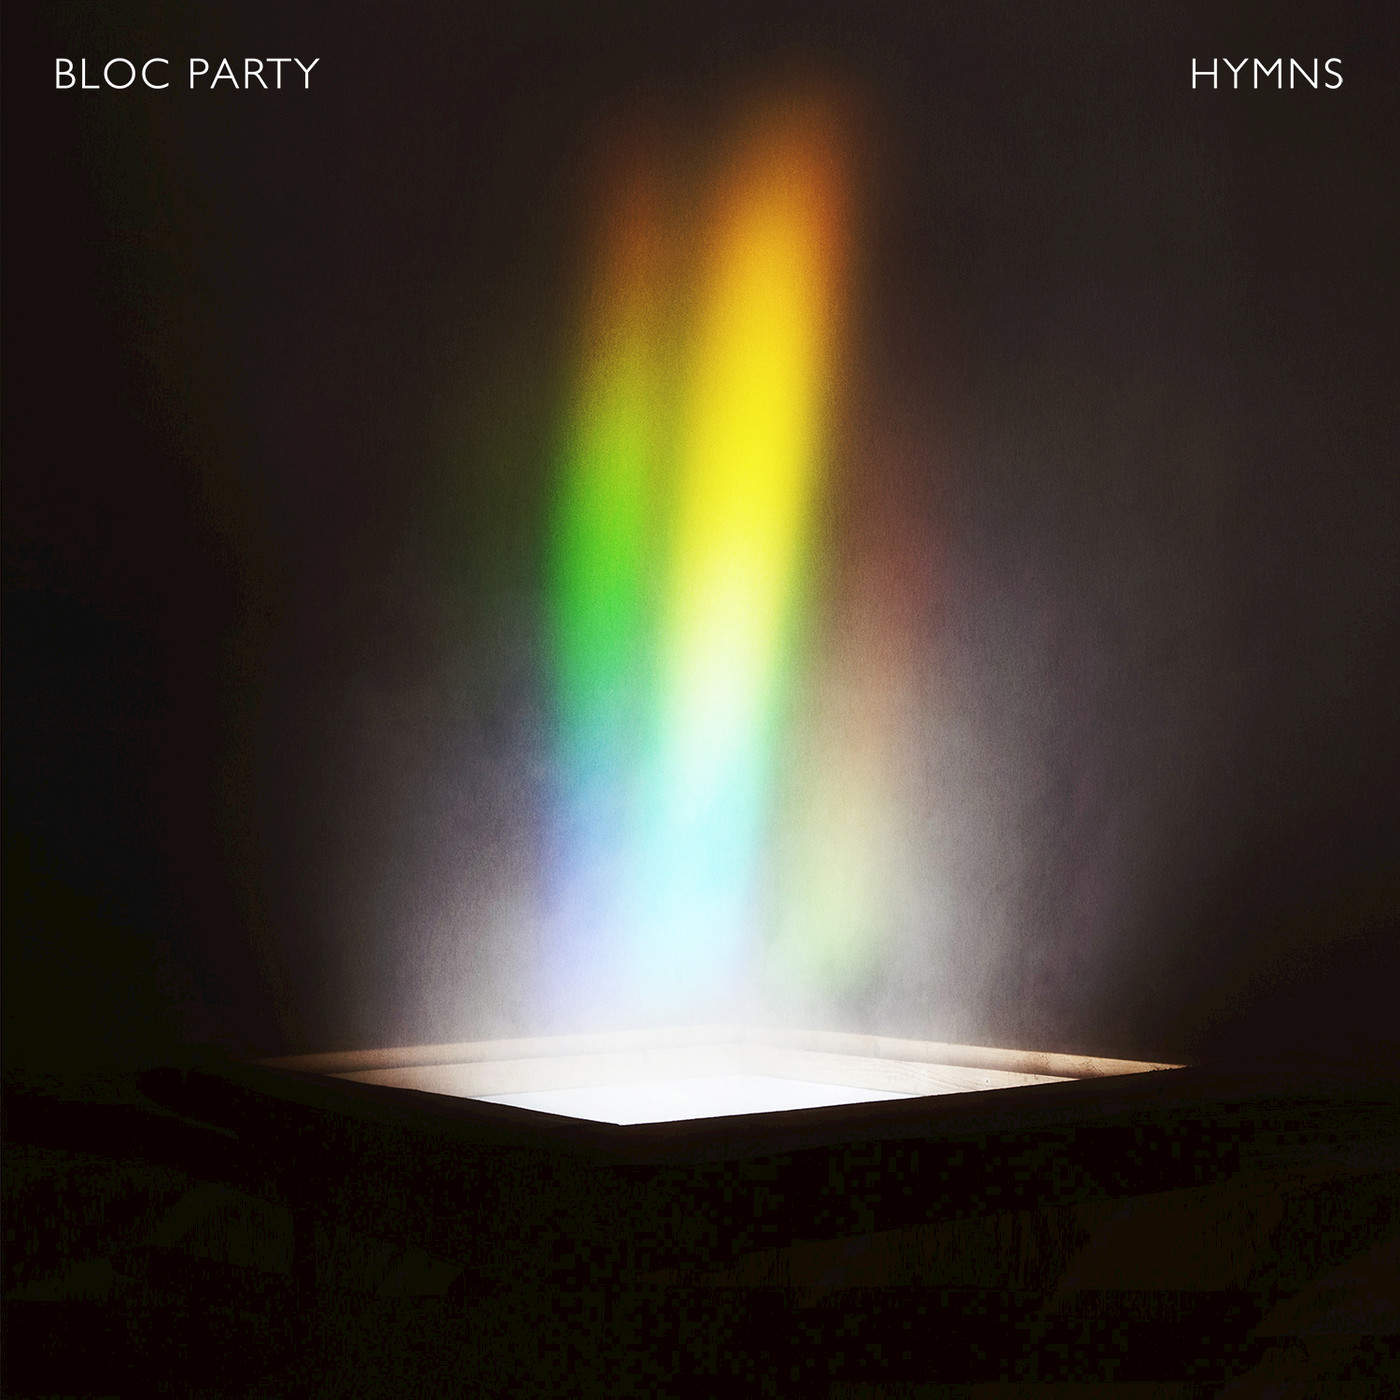 Album Review: “Hymns” by Bloc Party